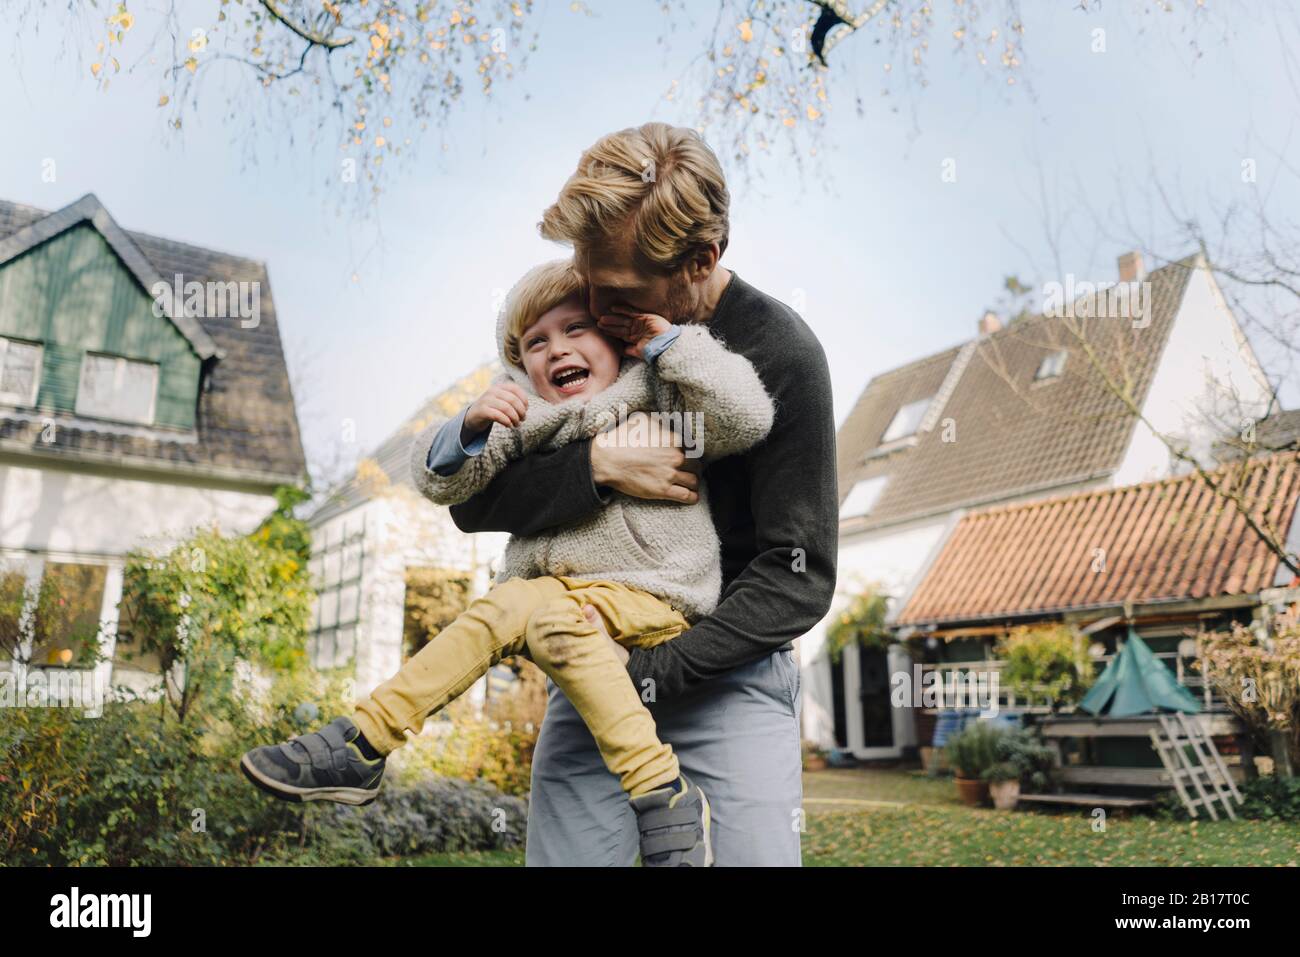 Happy father playing with son in garden Stock Photo